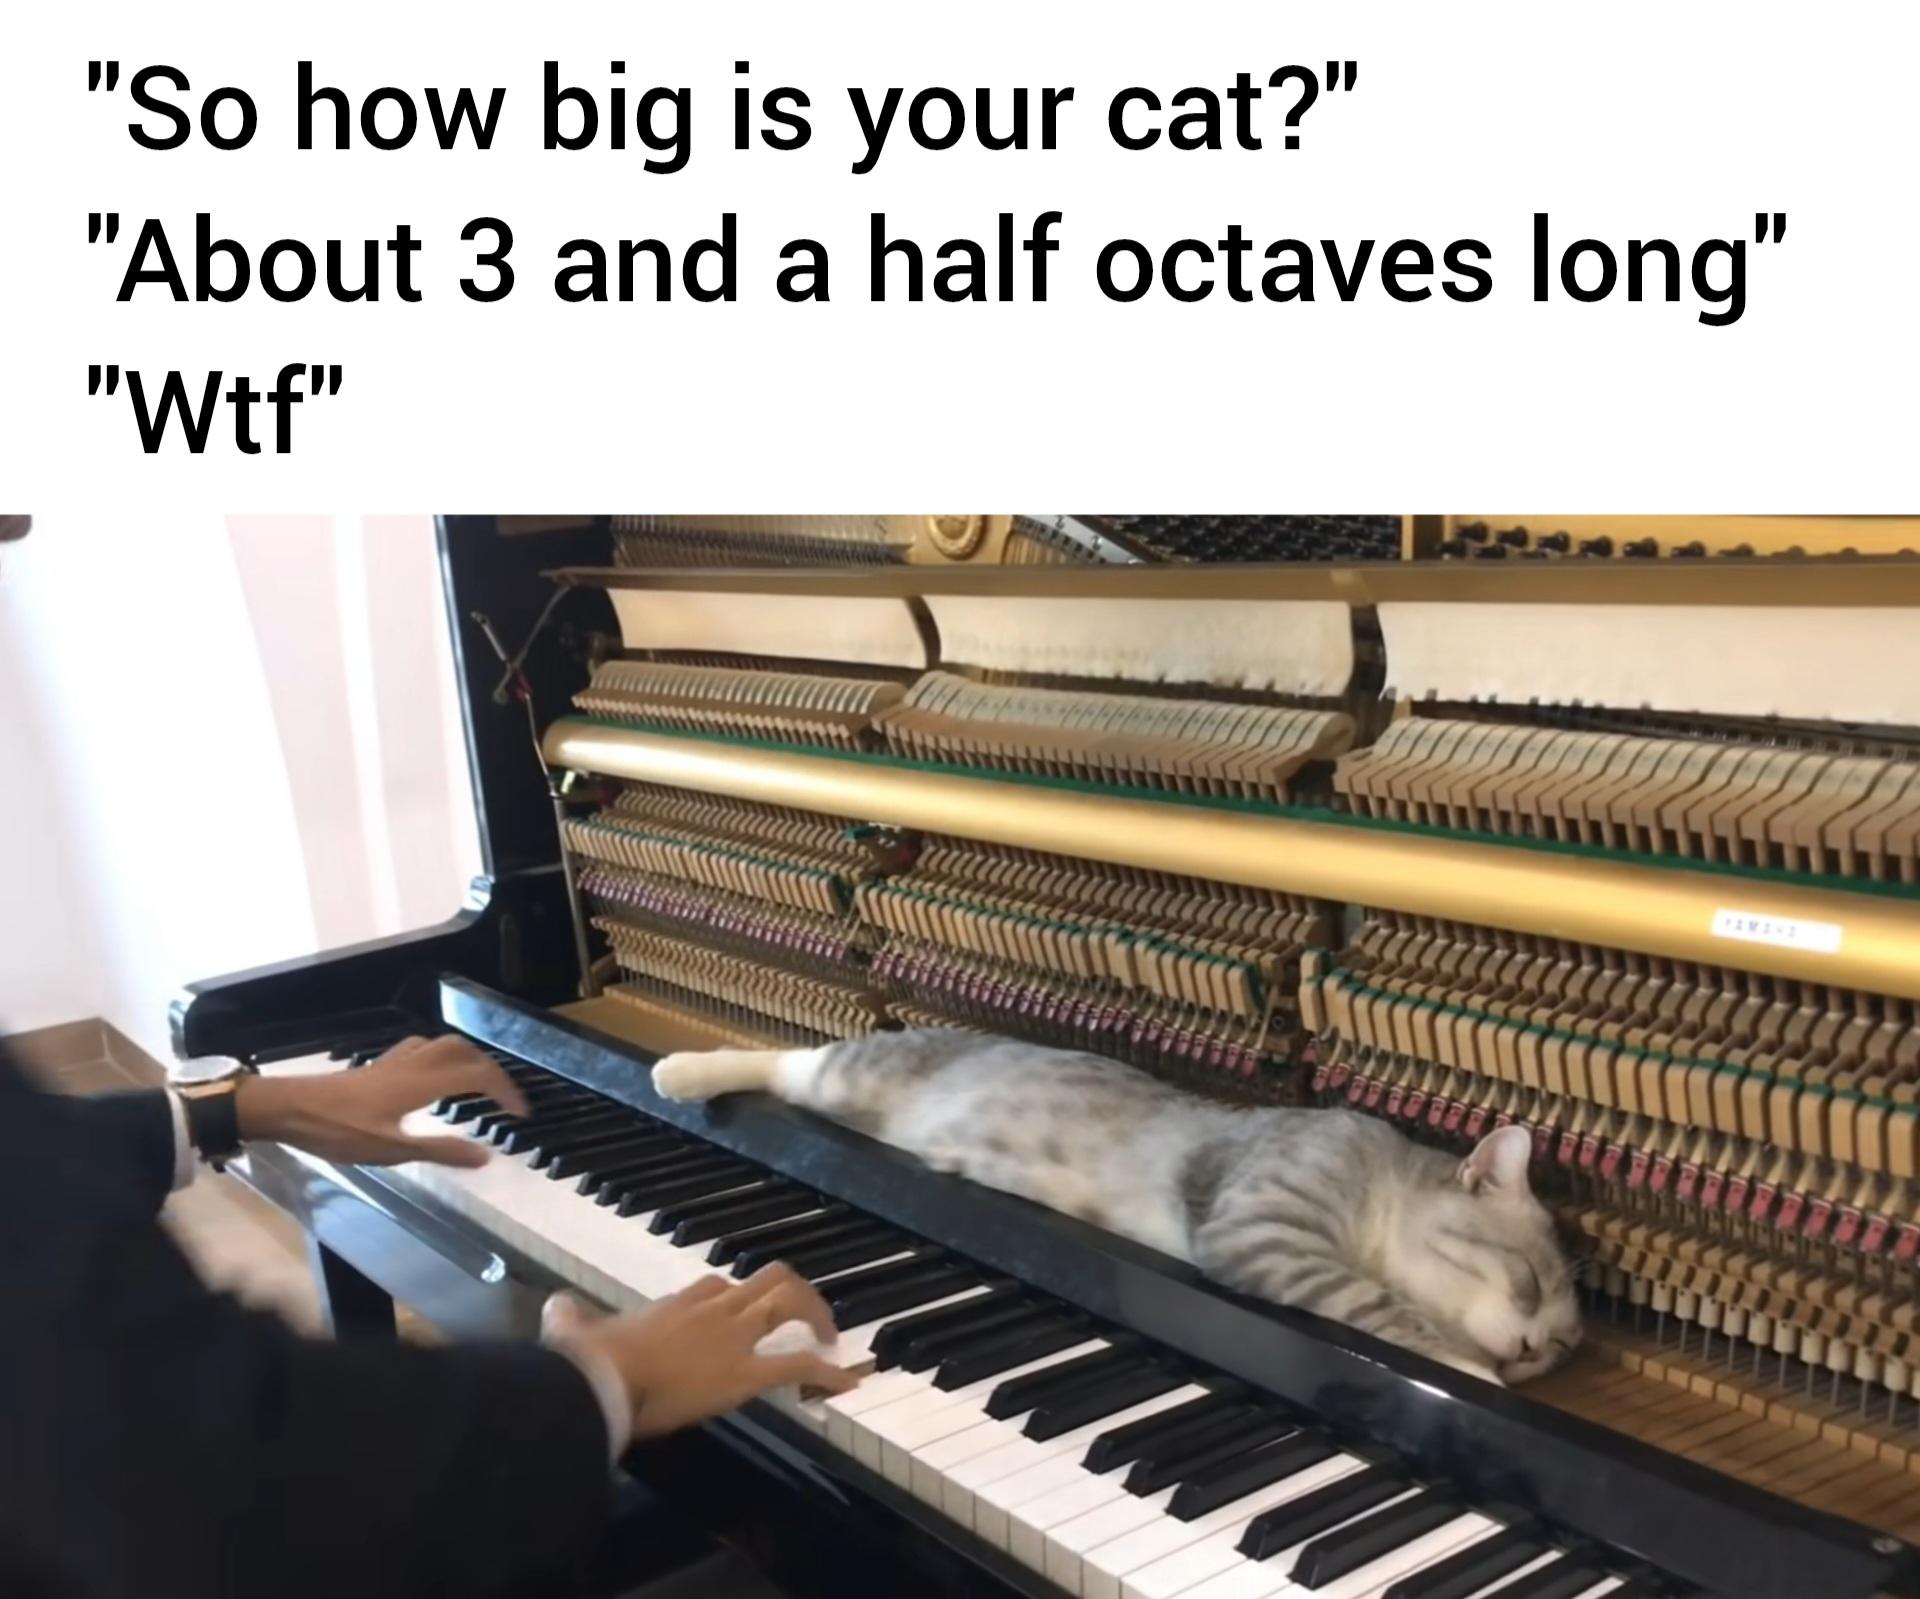 dank memes - funny memes - player piano - "So how big is your cat?" "About 3 and a half octaves long" "Wtf" a